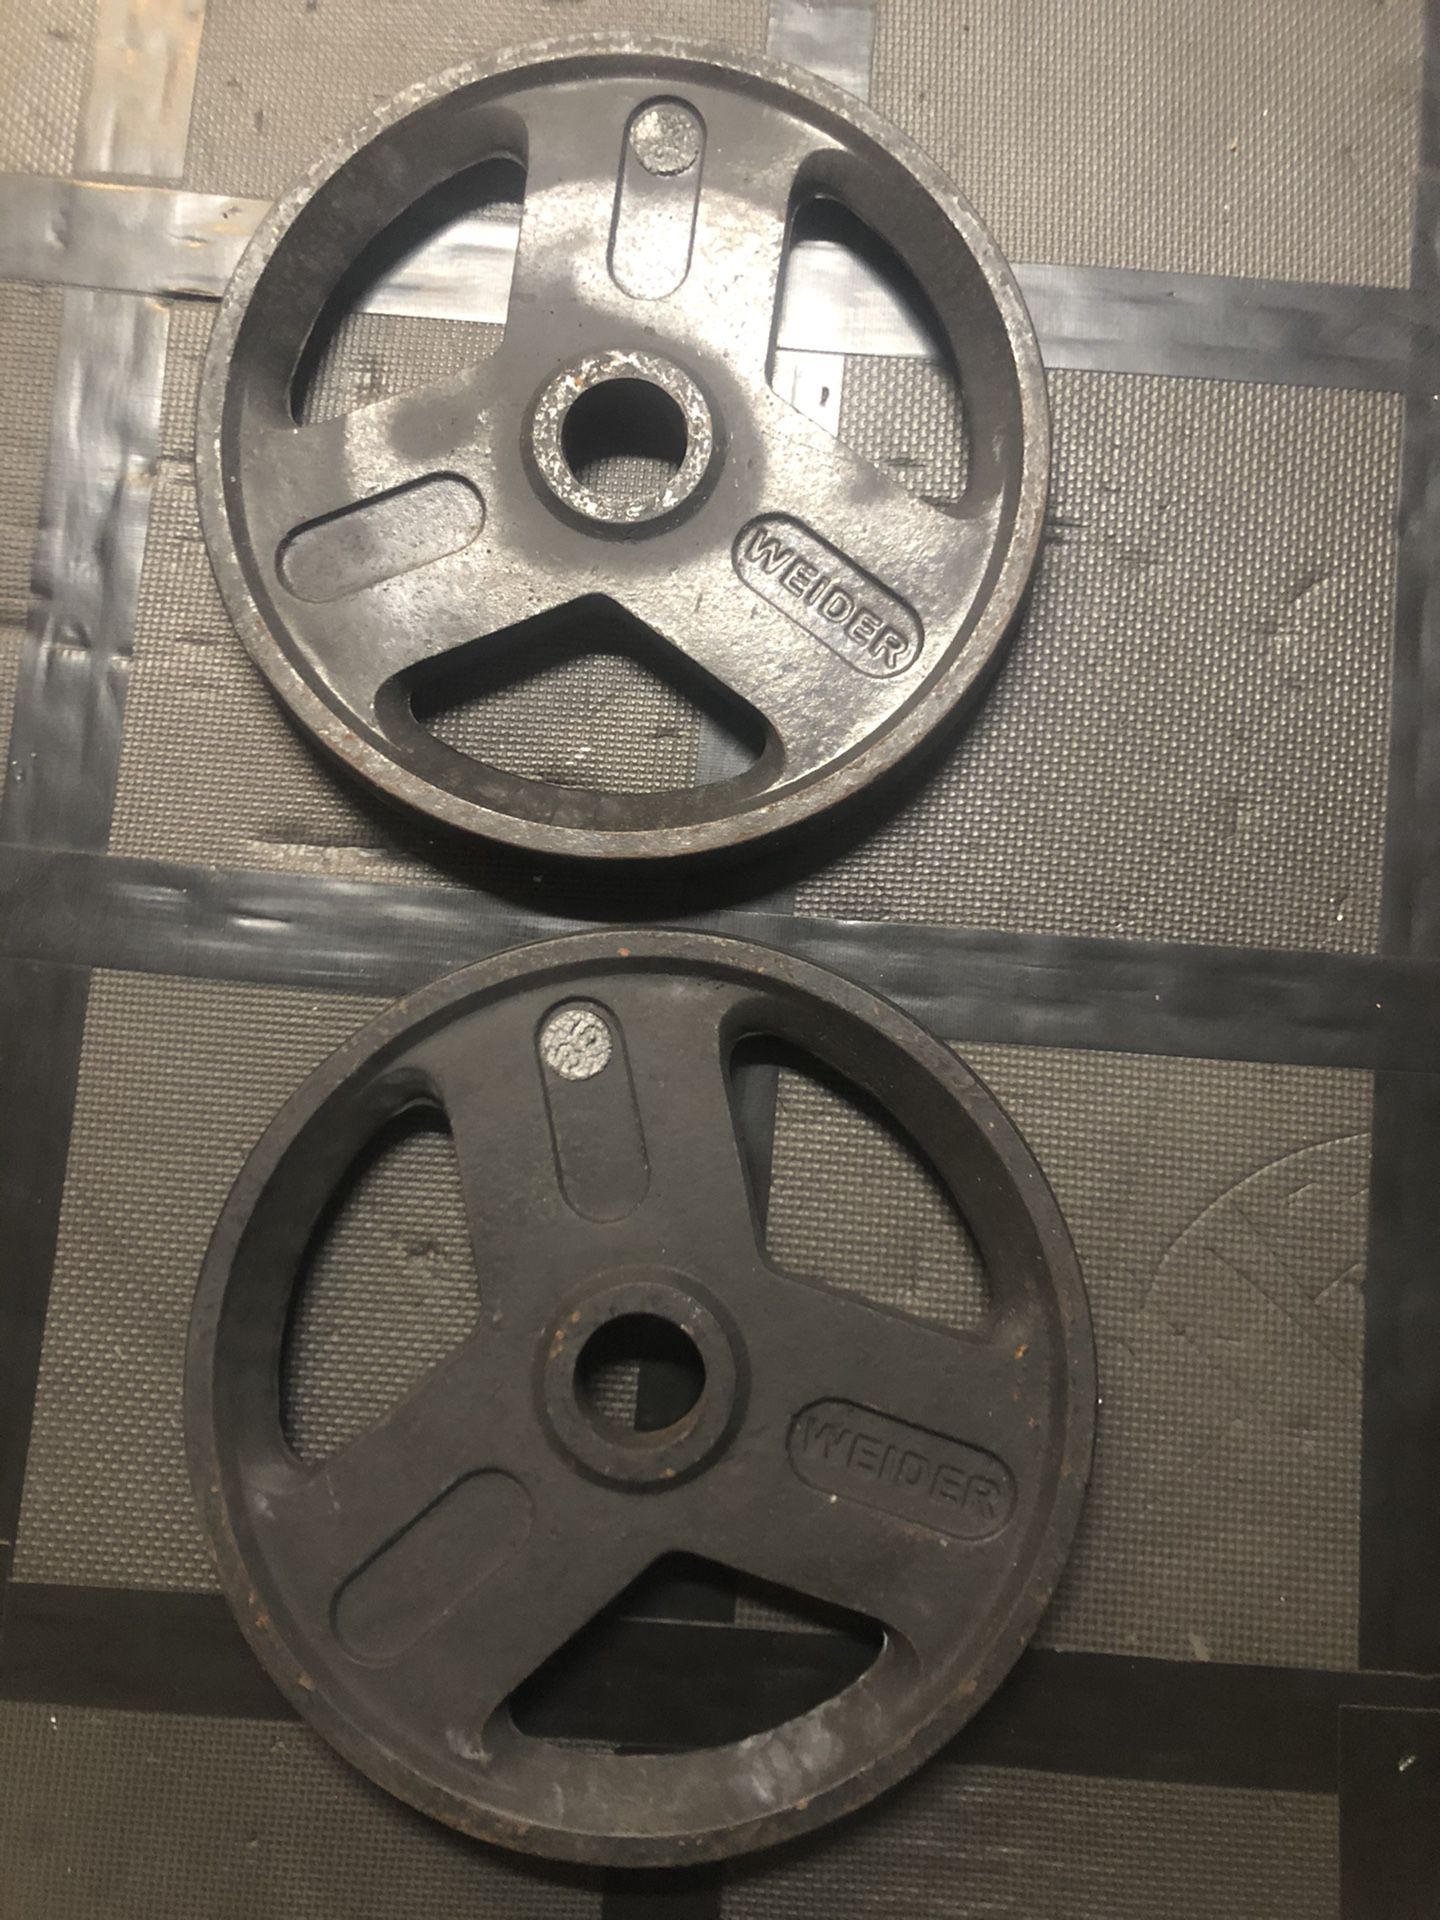 Pair of 35lb standard Olympic weight plates